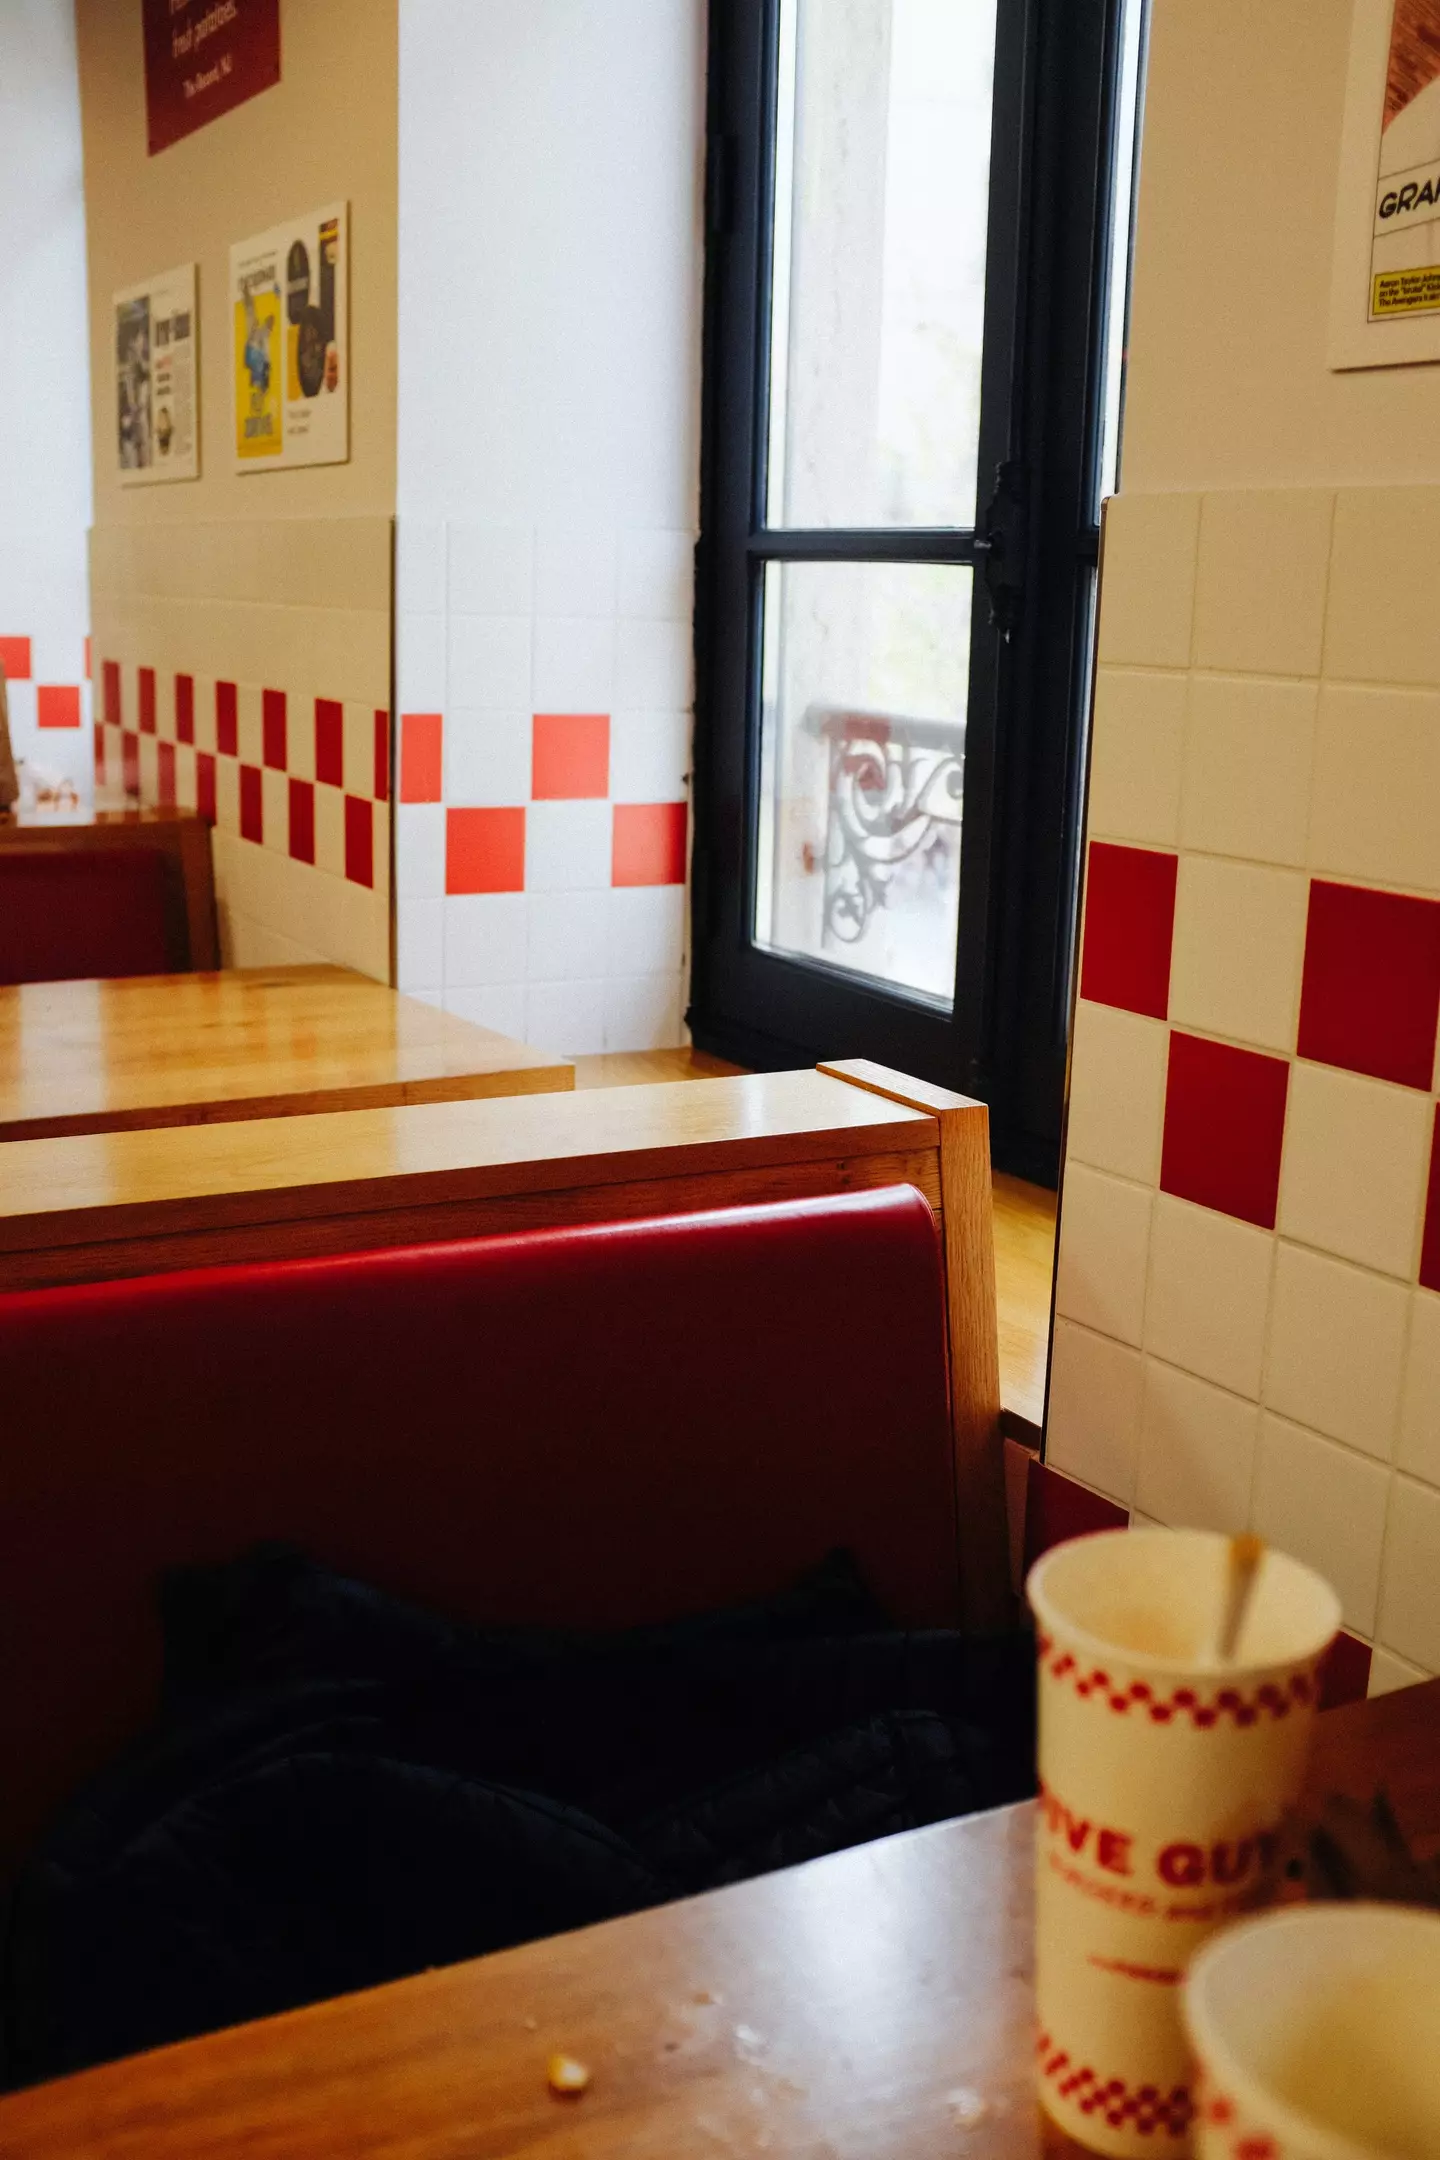 Five Guys has become known for its peanuts.